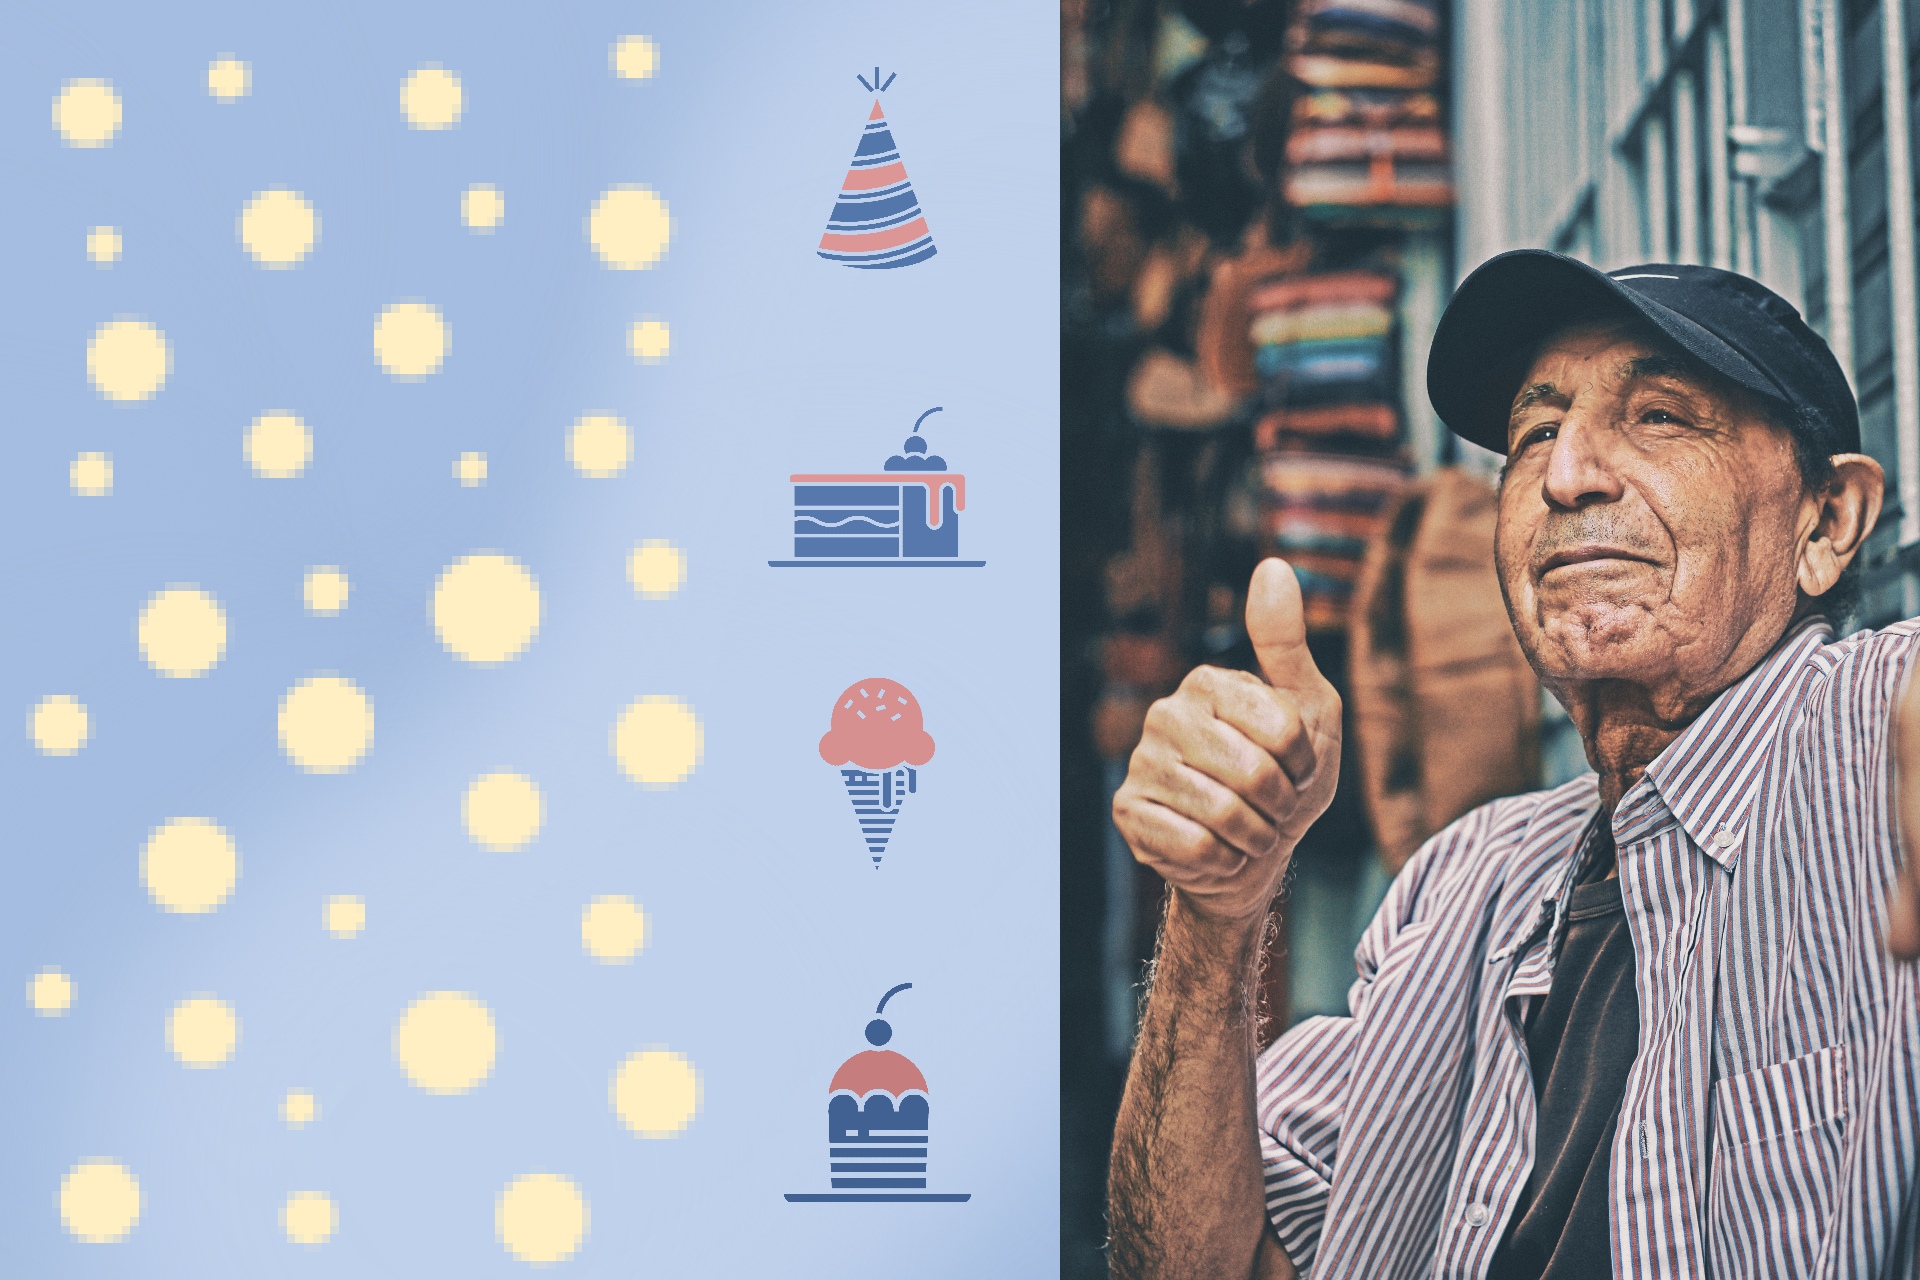 Cover image of gift ideas for 91-year-old man by Giftsedge